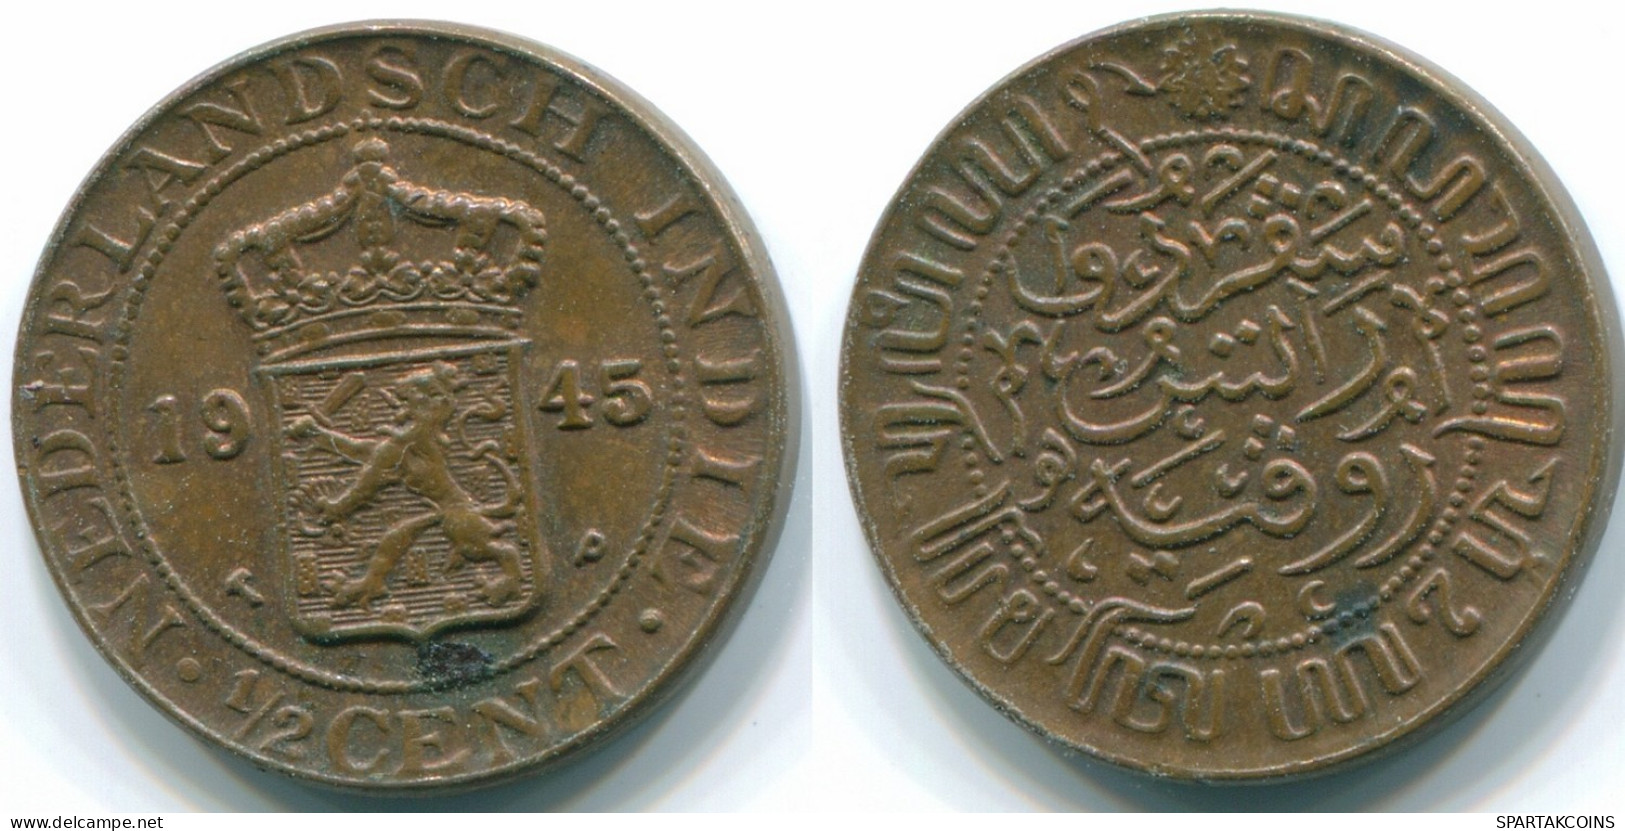 1/2 CENT 1945 NETHERLANDS EAST INDIES INDONESIA Bronze Colonial Coin #S13089.U.A - Indes Néerlandaises